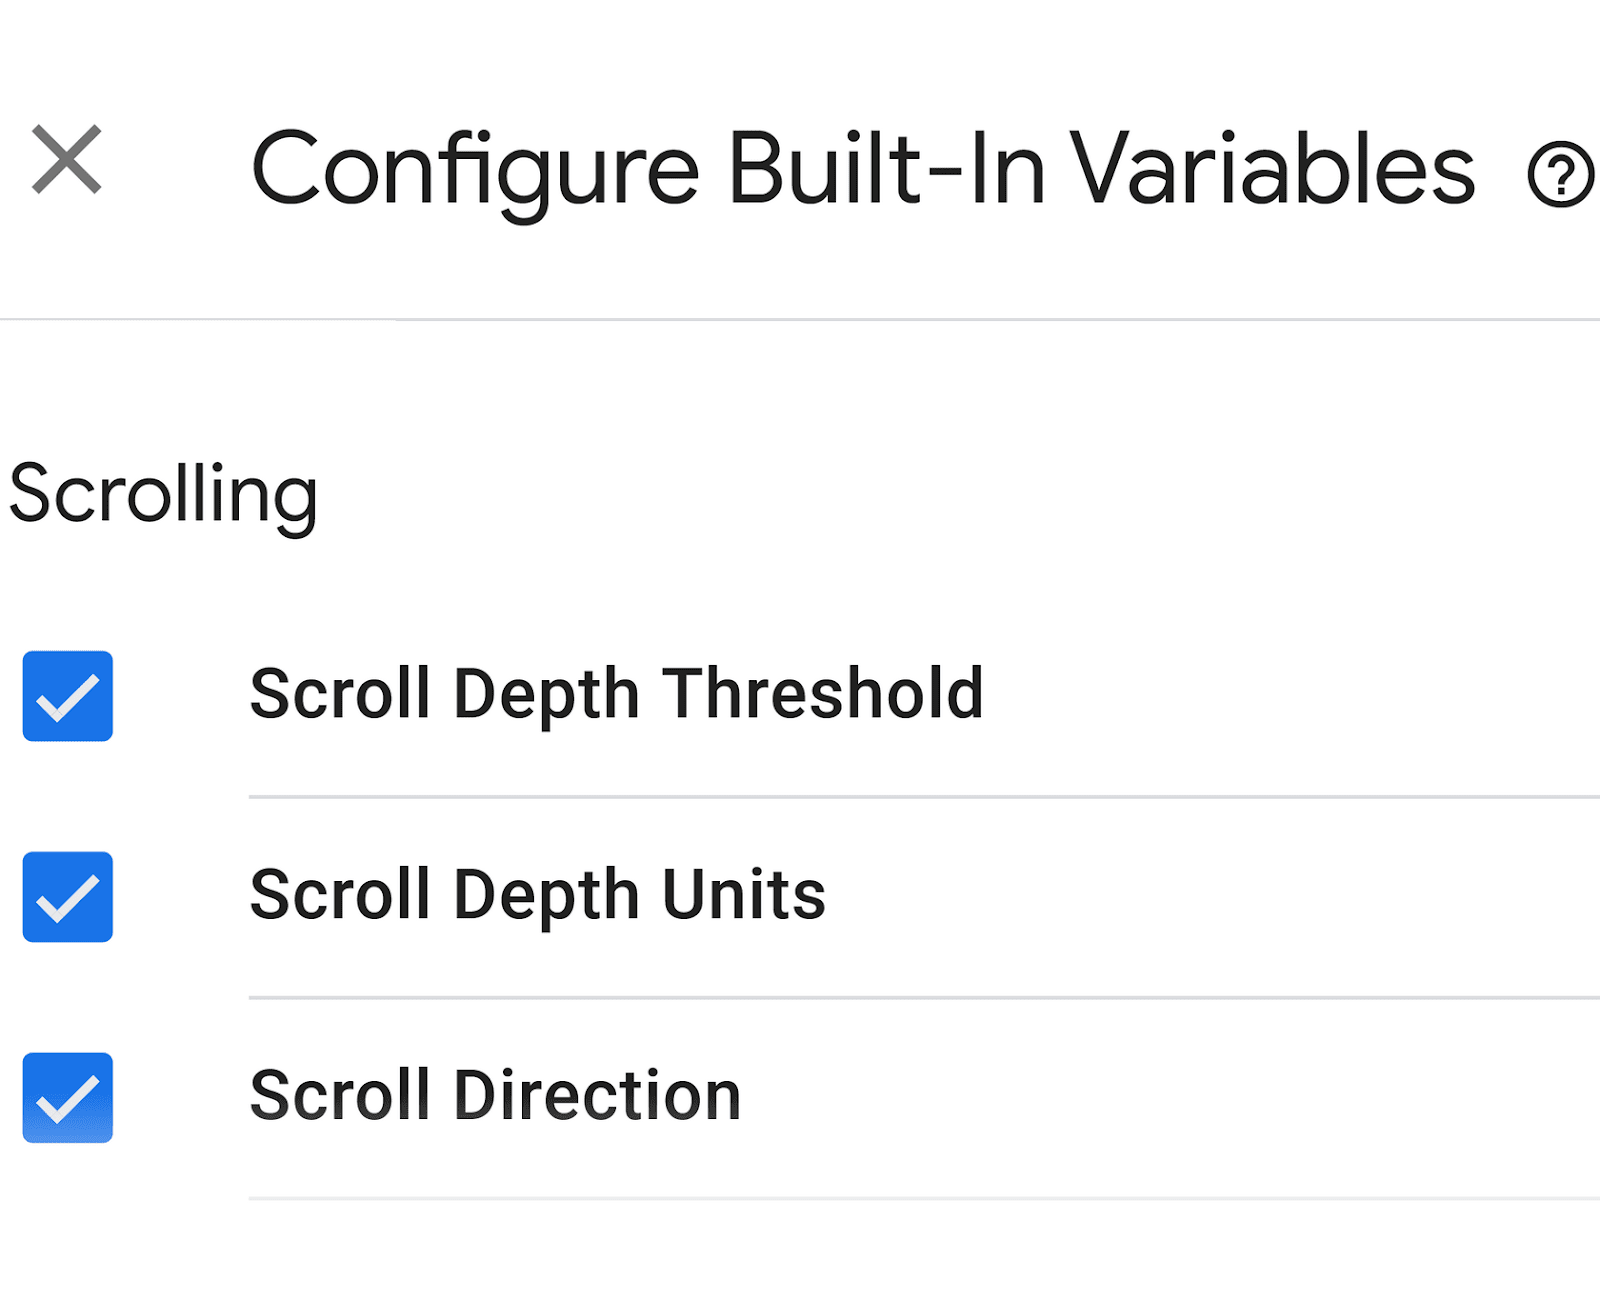 "Scroll Depth Threshold," "Scroll Depth Units," and "Scroll Direction" turned connected  nether  “Scrolling” section